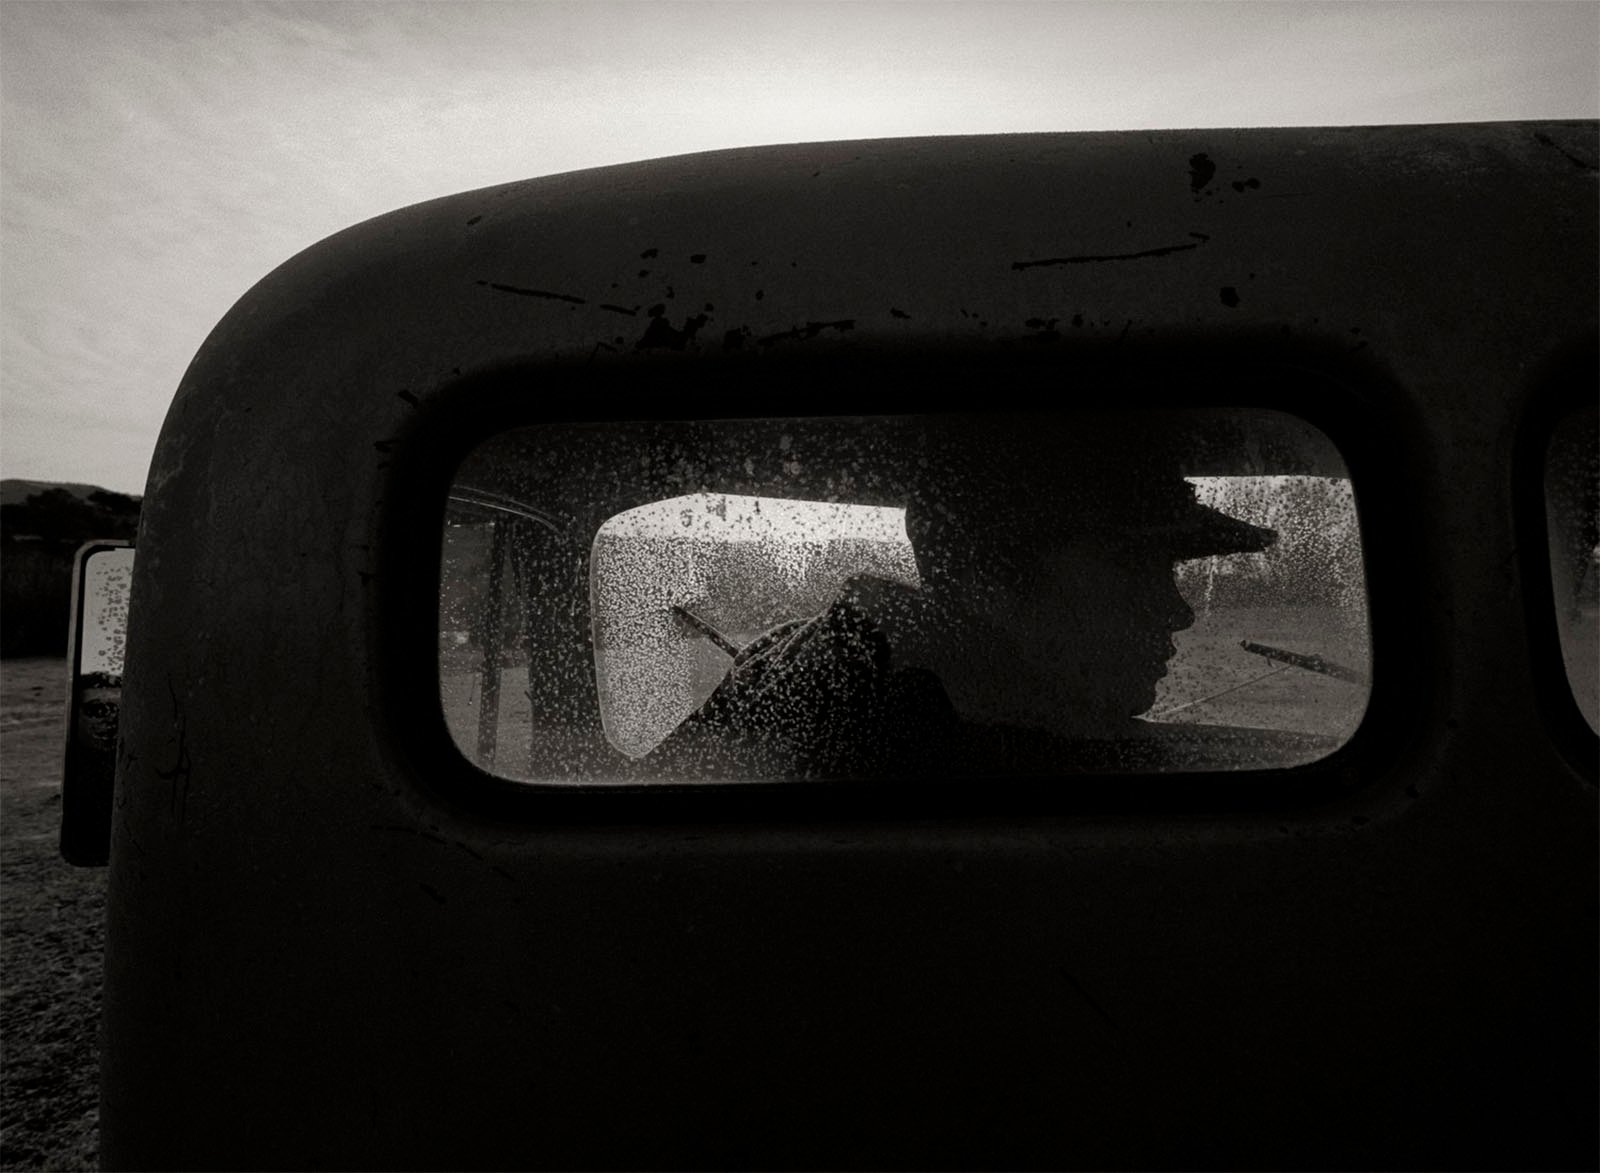 A silhouette of a person in a hat can be seen through a fogged and slightly dirty rear window of an old vehicle. The background is hazy, with barely discernible details, giving an atmospheric, mysterious feel to the black and white image.